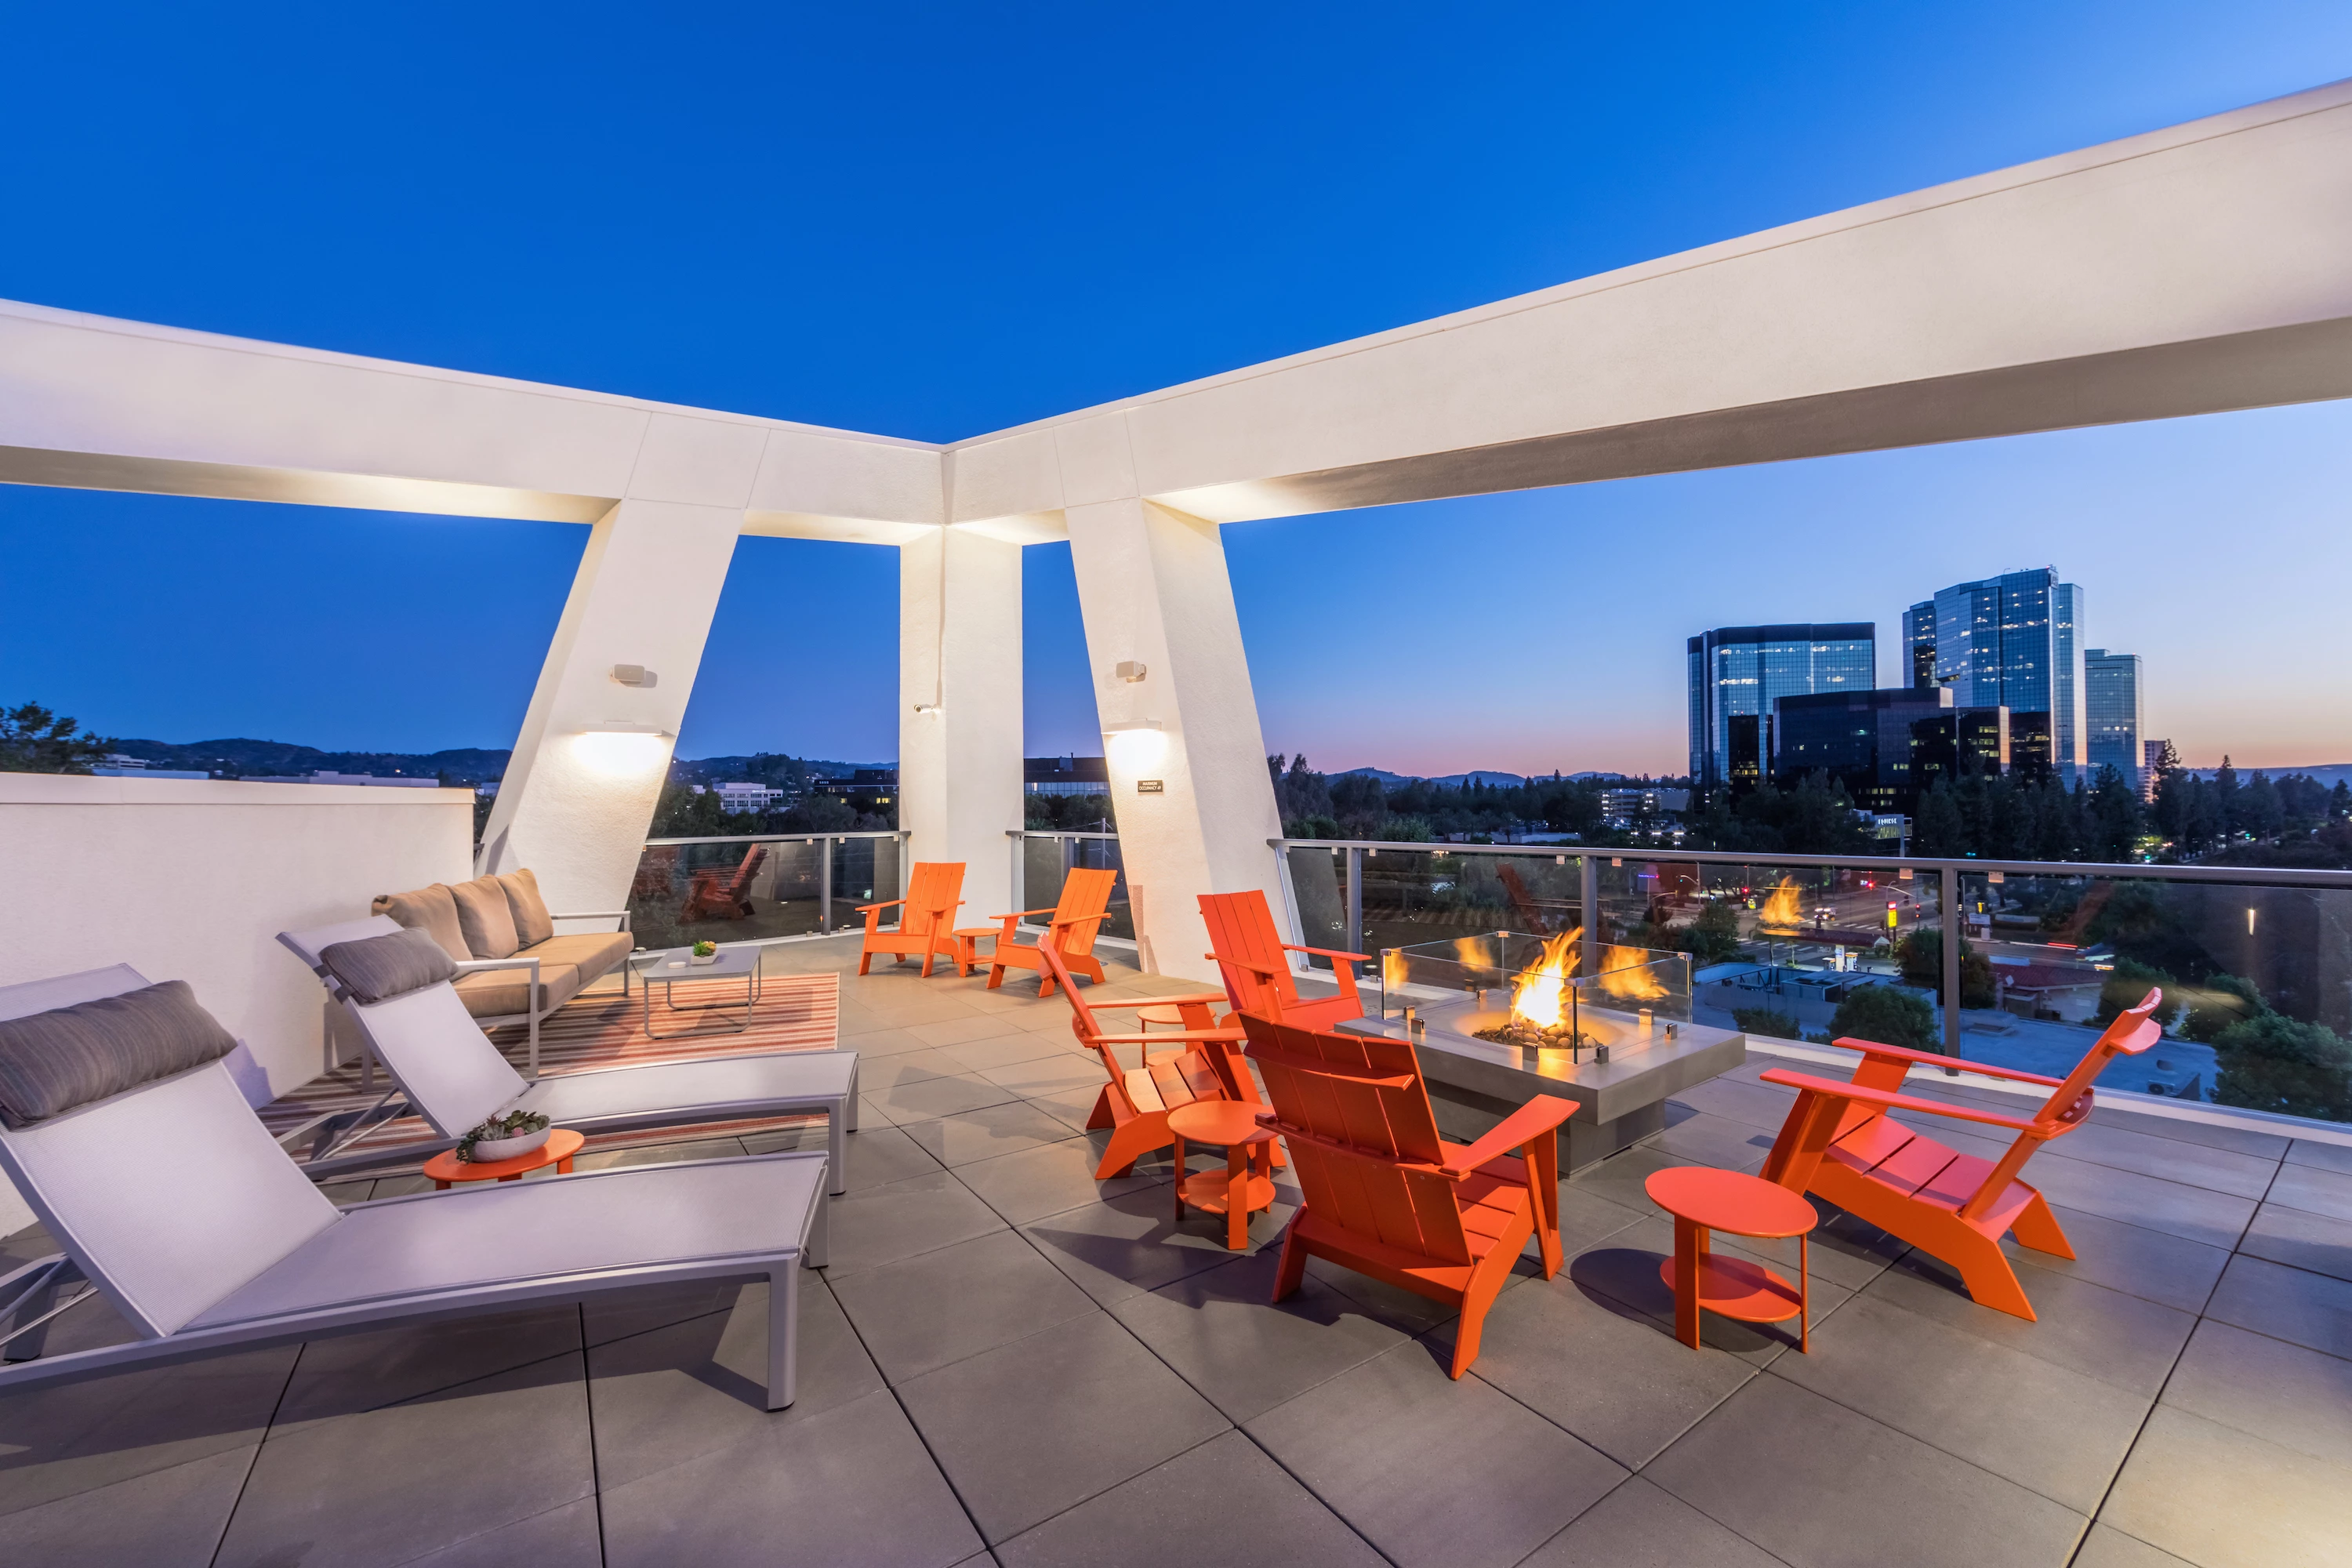 1241-10-amenity-tower-rooftop-lounge-fire-pit-night-at-vela-on-ox-apartments-in-woodl.jpg